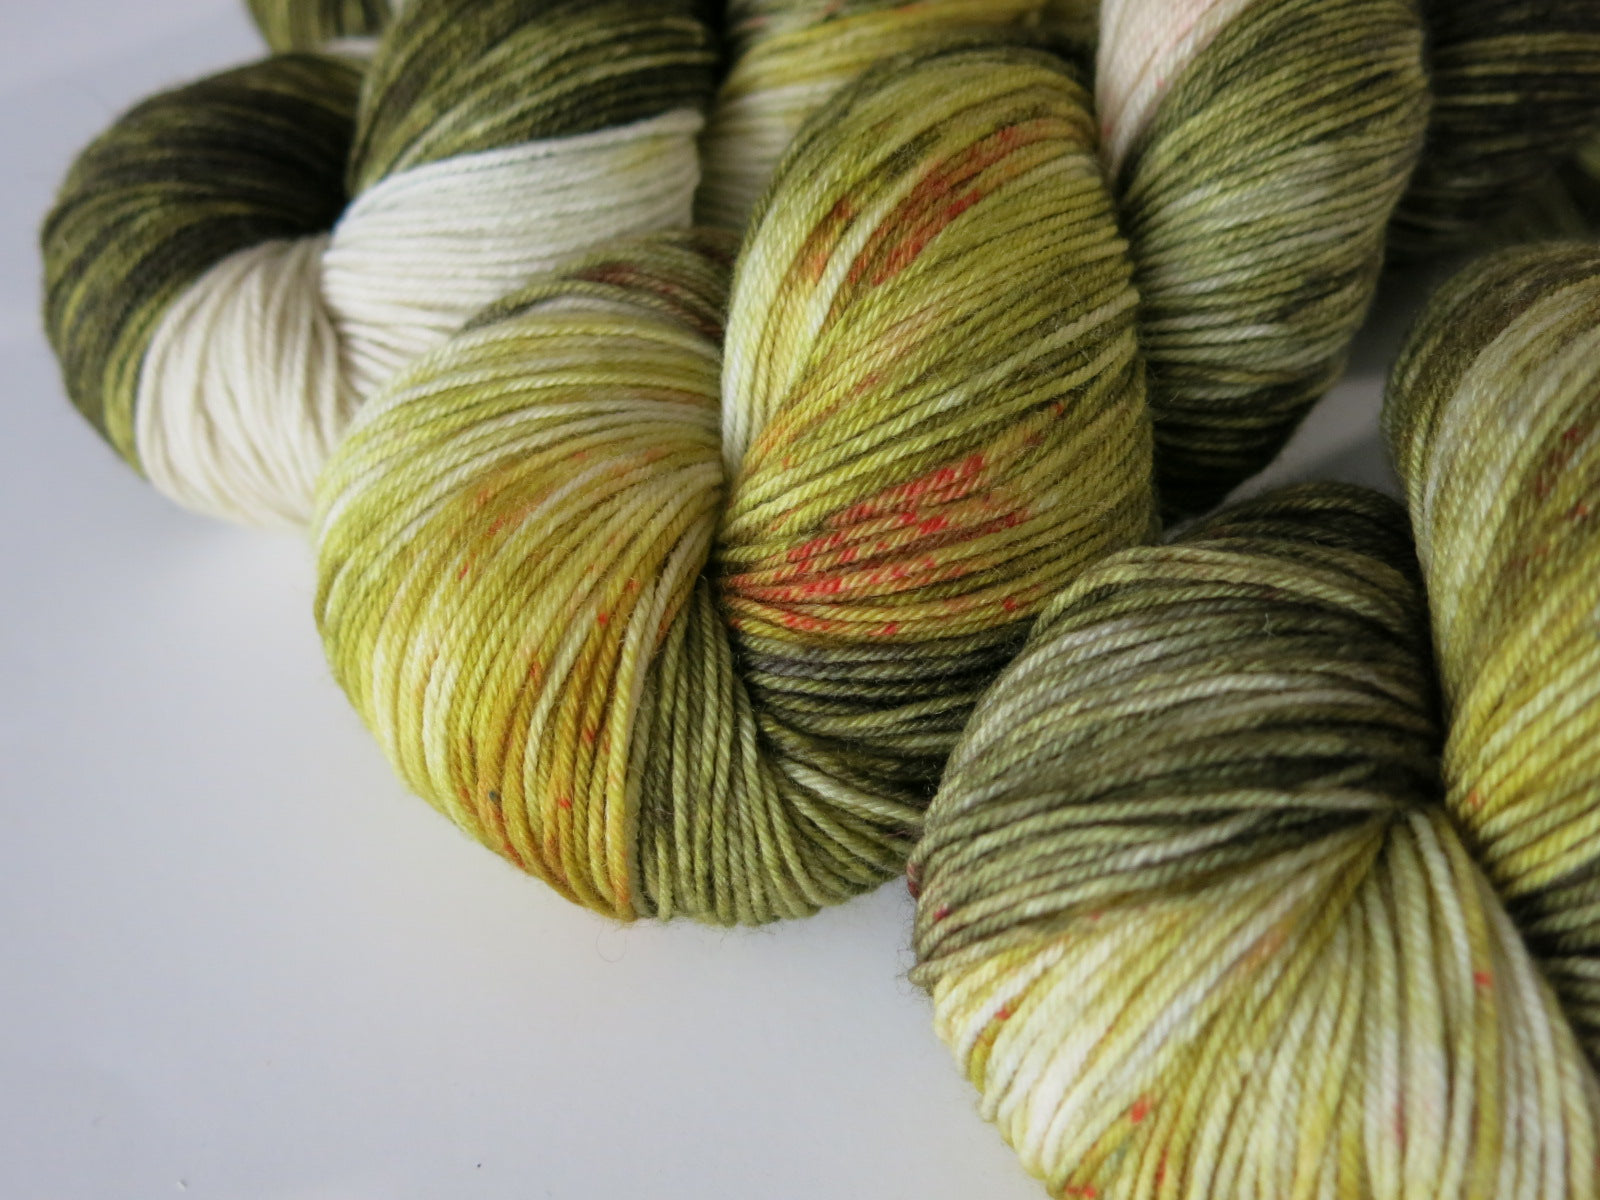 green and cream 4 ply sock yarn with red speckles like a trex